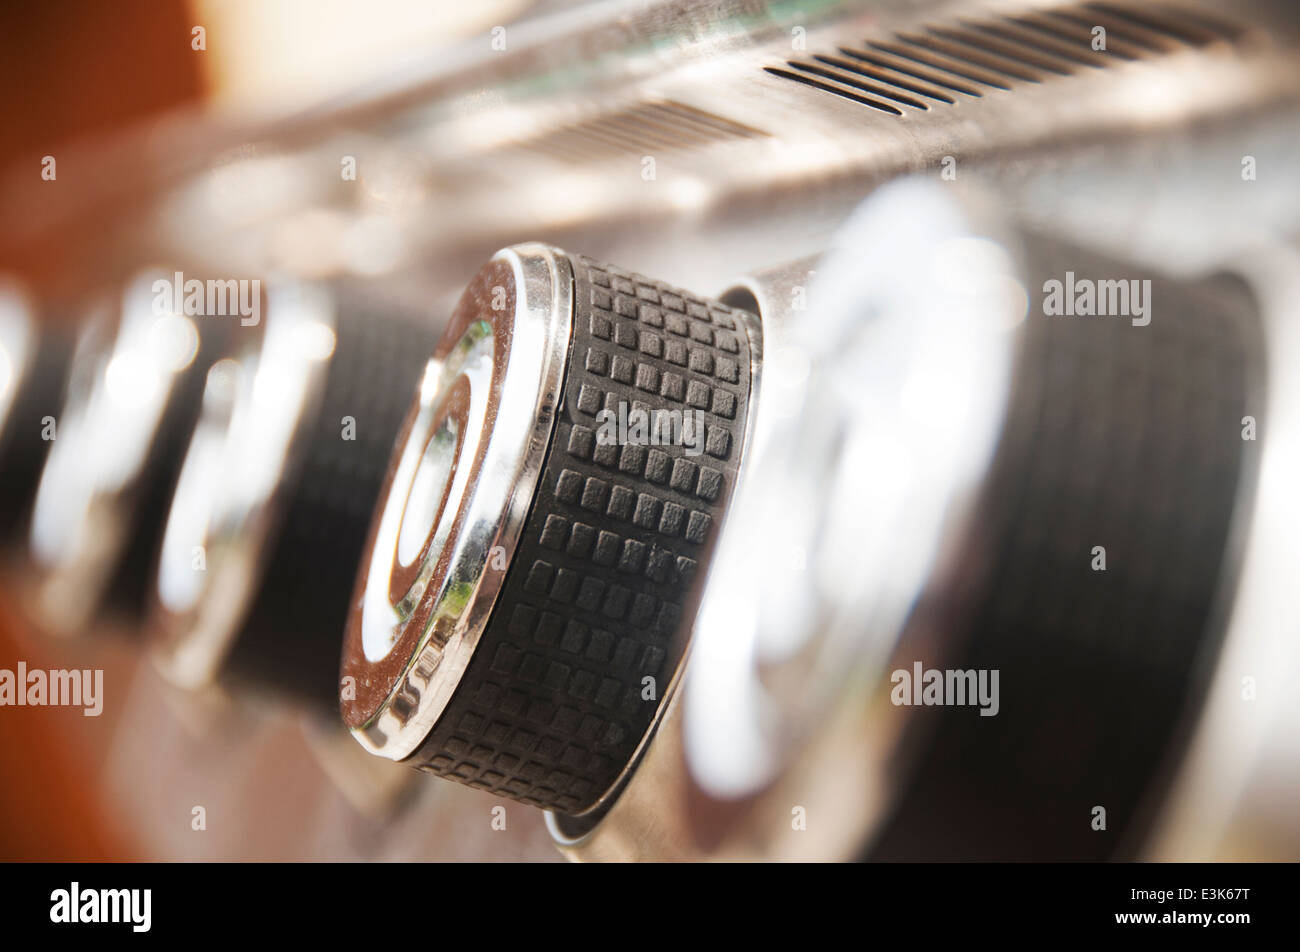 Shiney metal control knobs on a gas barbeque Stock Photo